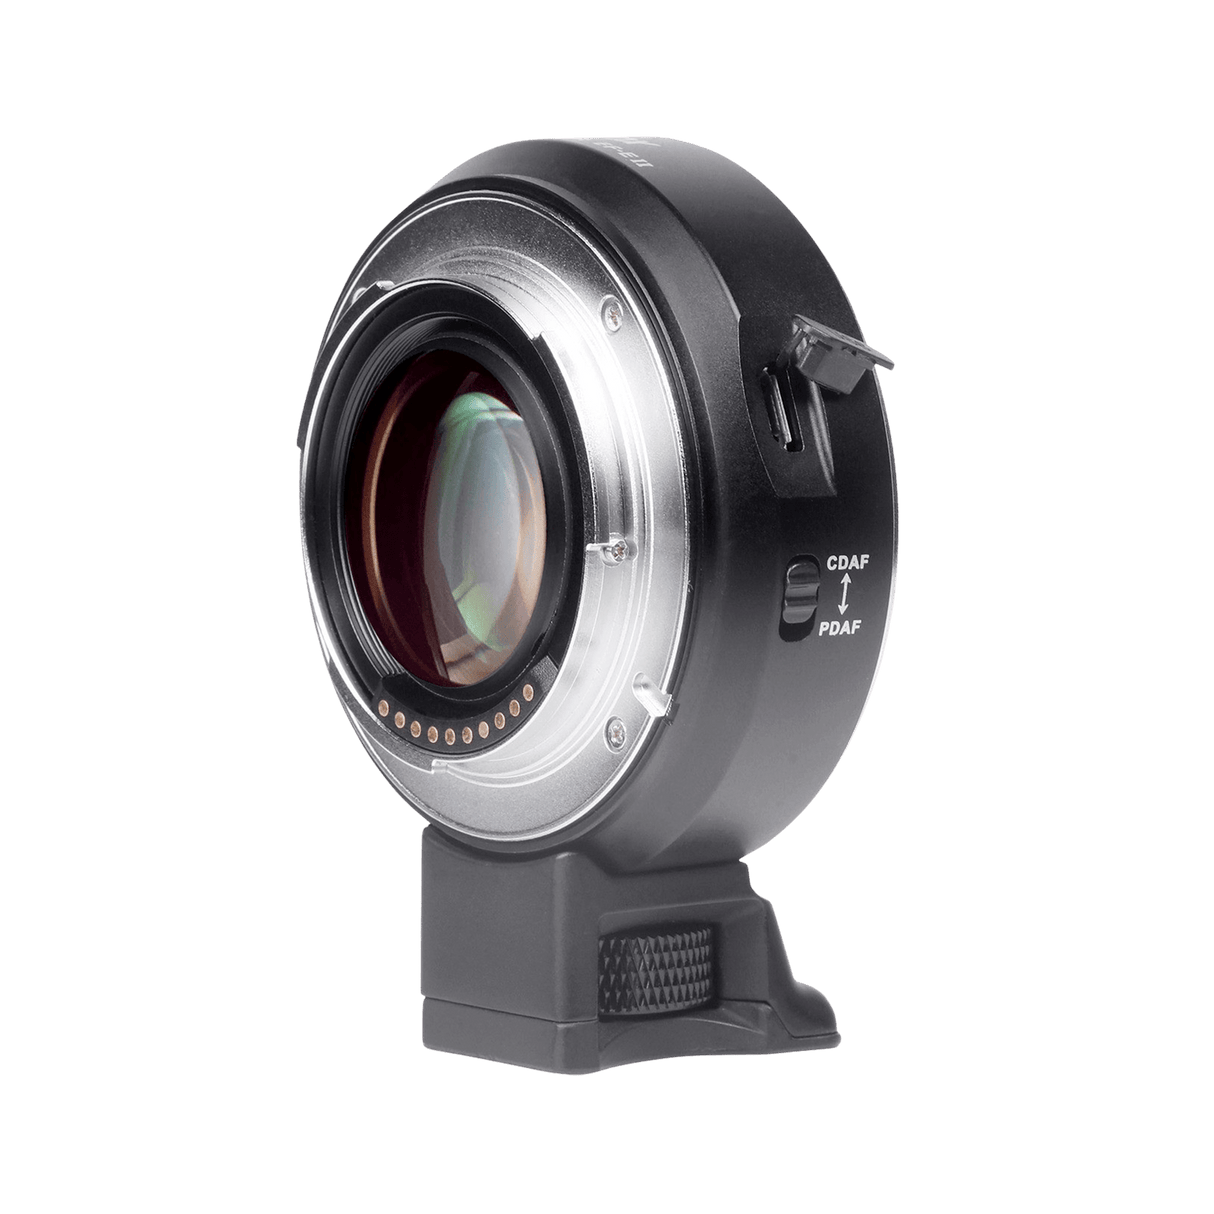 VILTROX EF-E II Auto Focus Booster Lens Adapter for Canon EF Lens to S